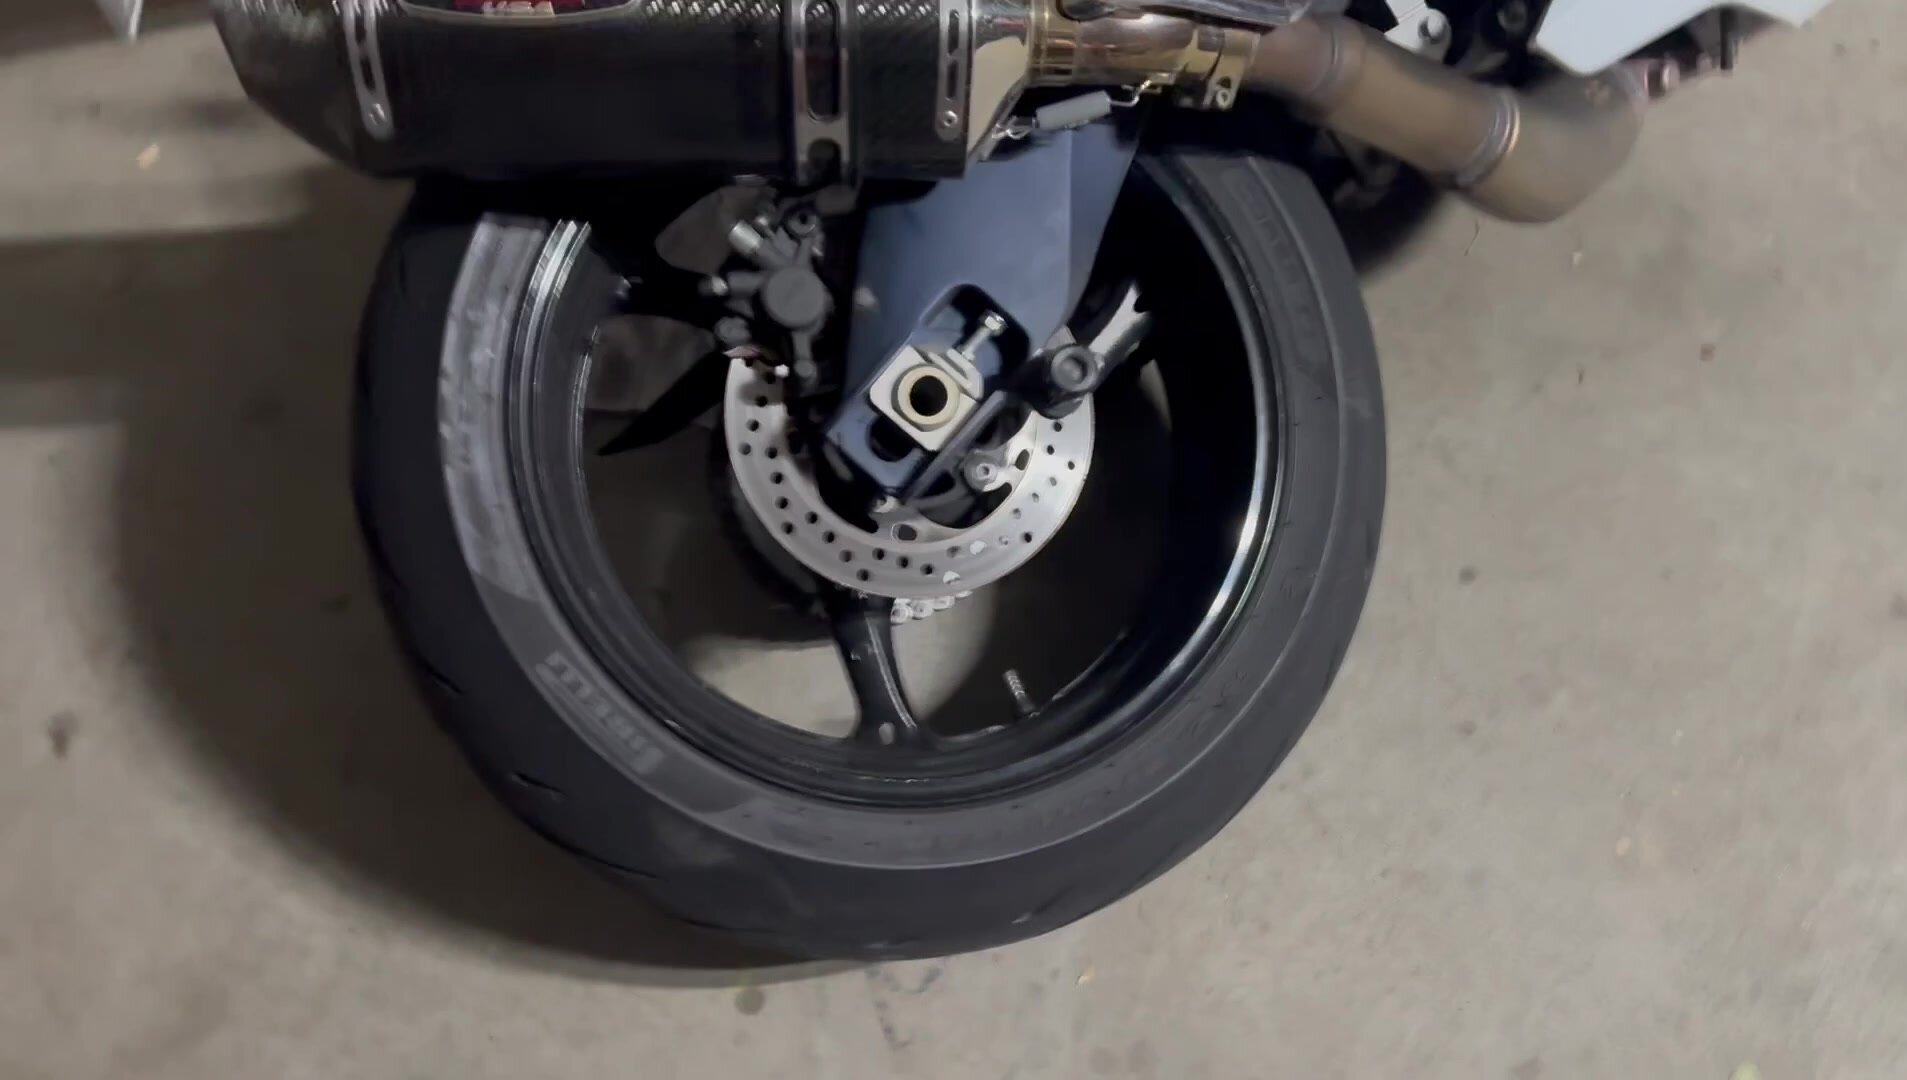 Motorcycle tire and boot fun 1